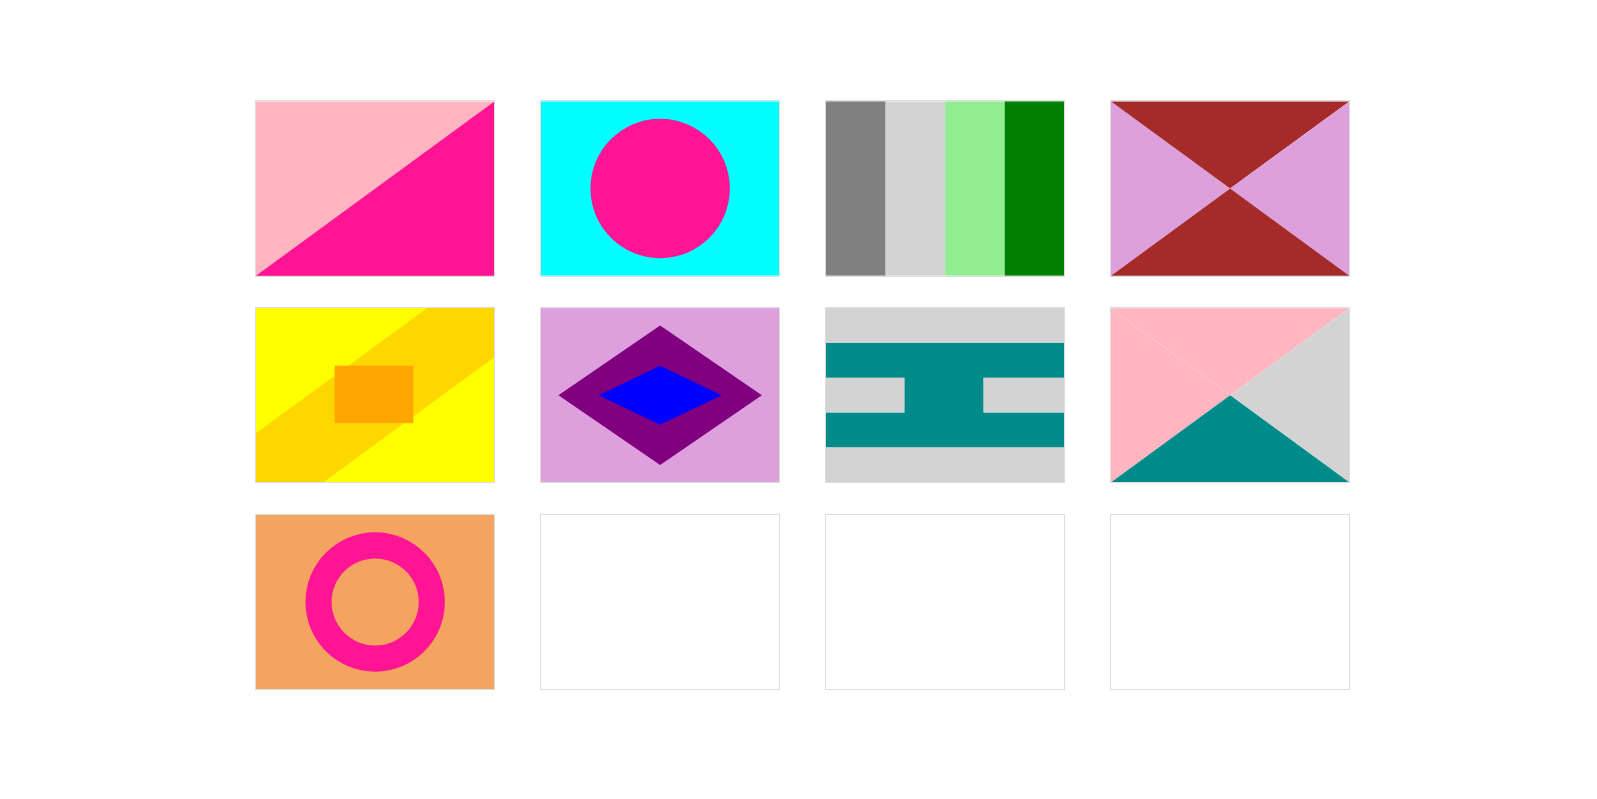 Nine flags, arrayed in two rows of four and one of one, with brightly colored minimal geometric abstractions